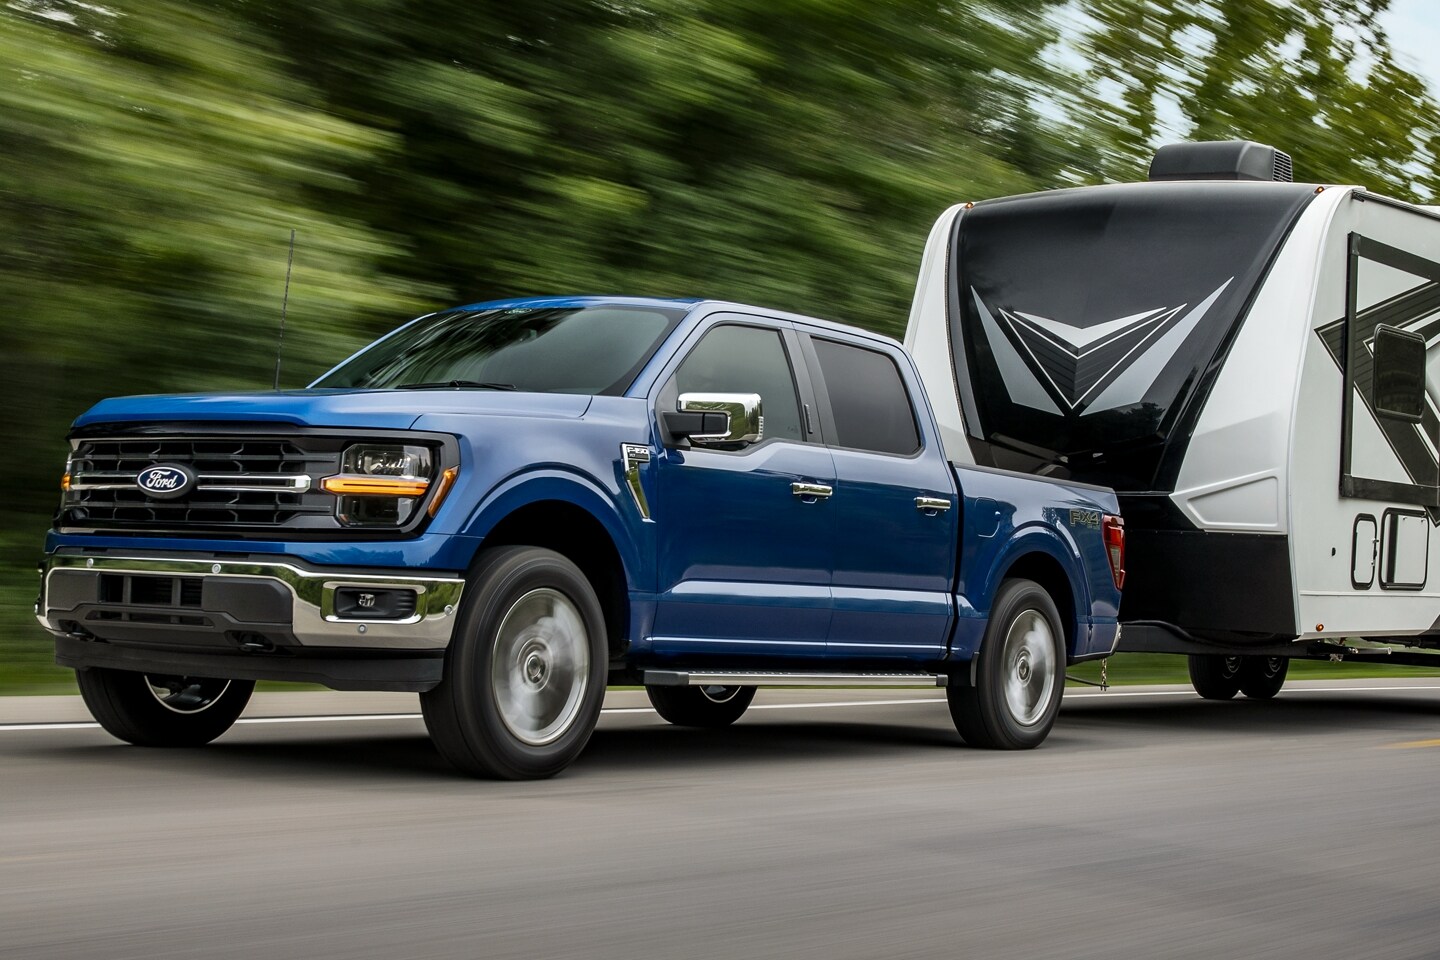 Differences between Ford Truck Models